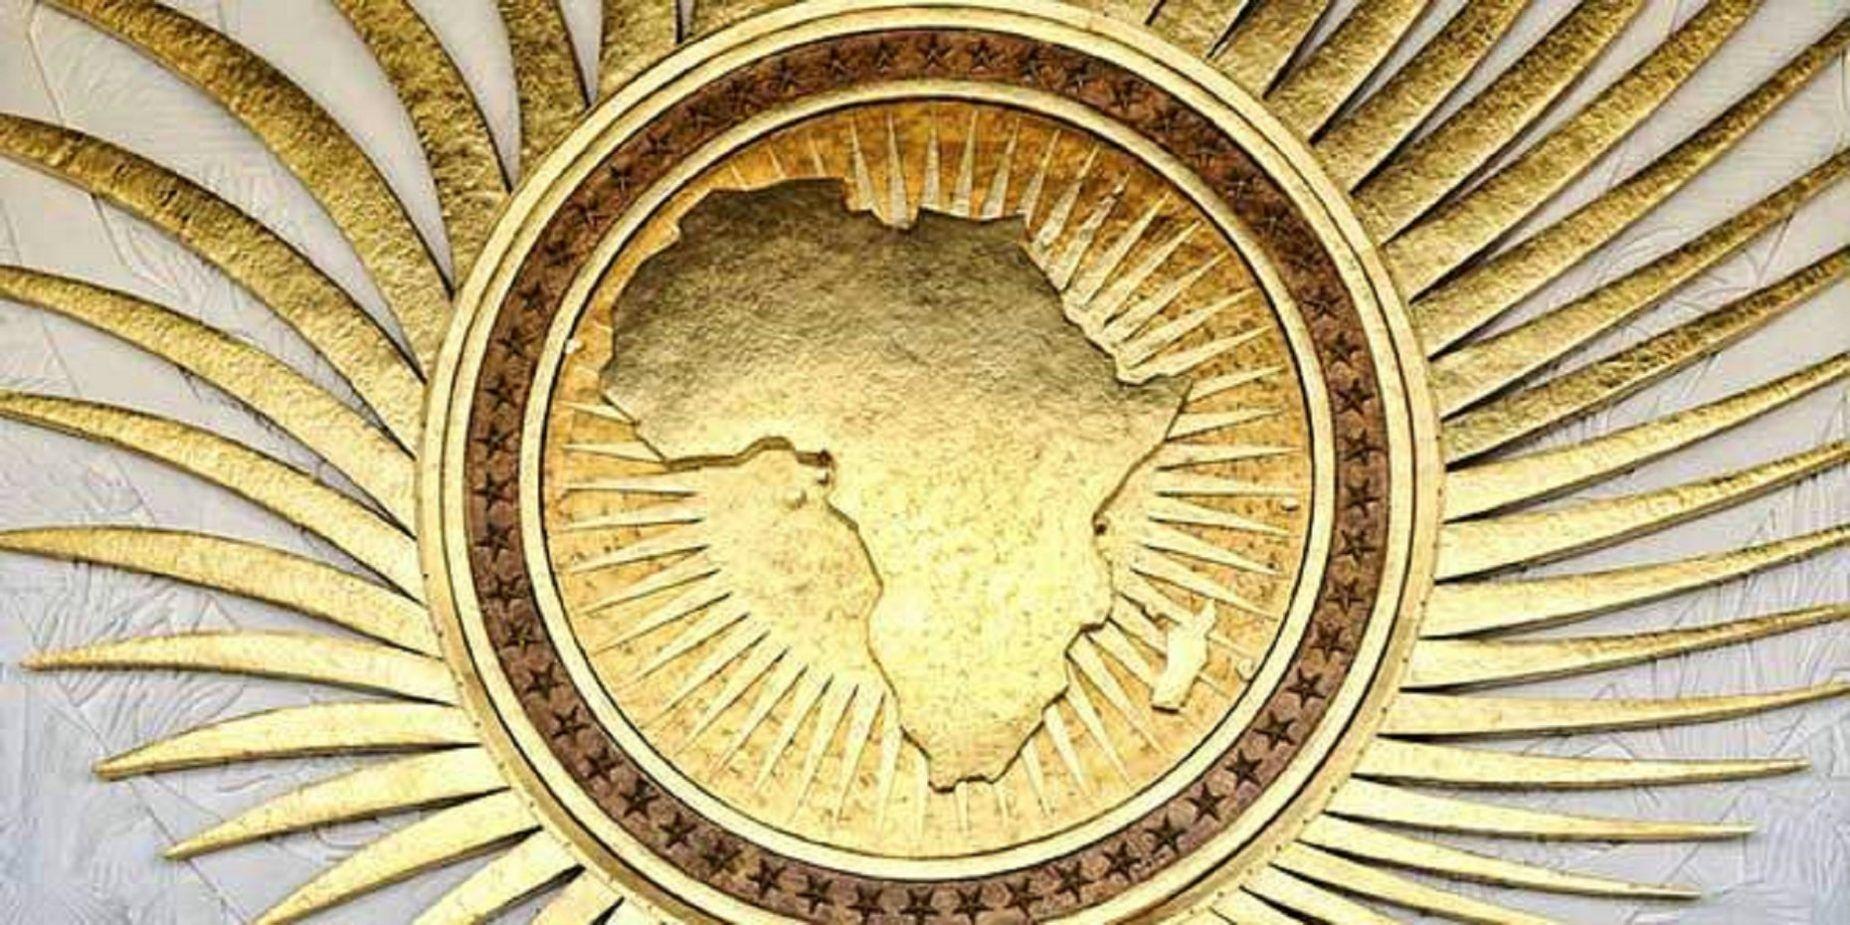 African Union Logo - History of Africa's Regional Integration Efforts. United Nations